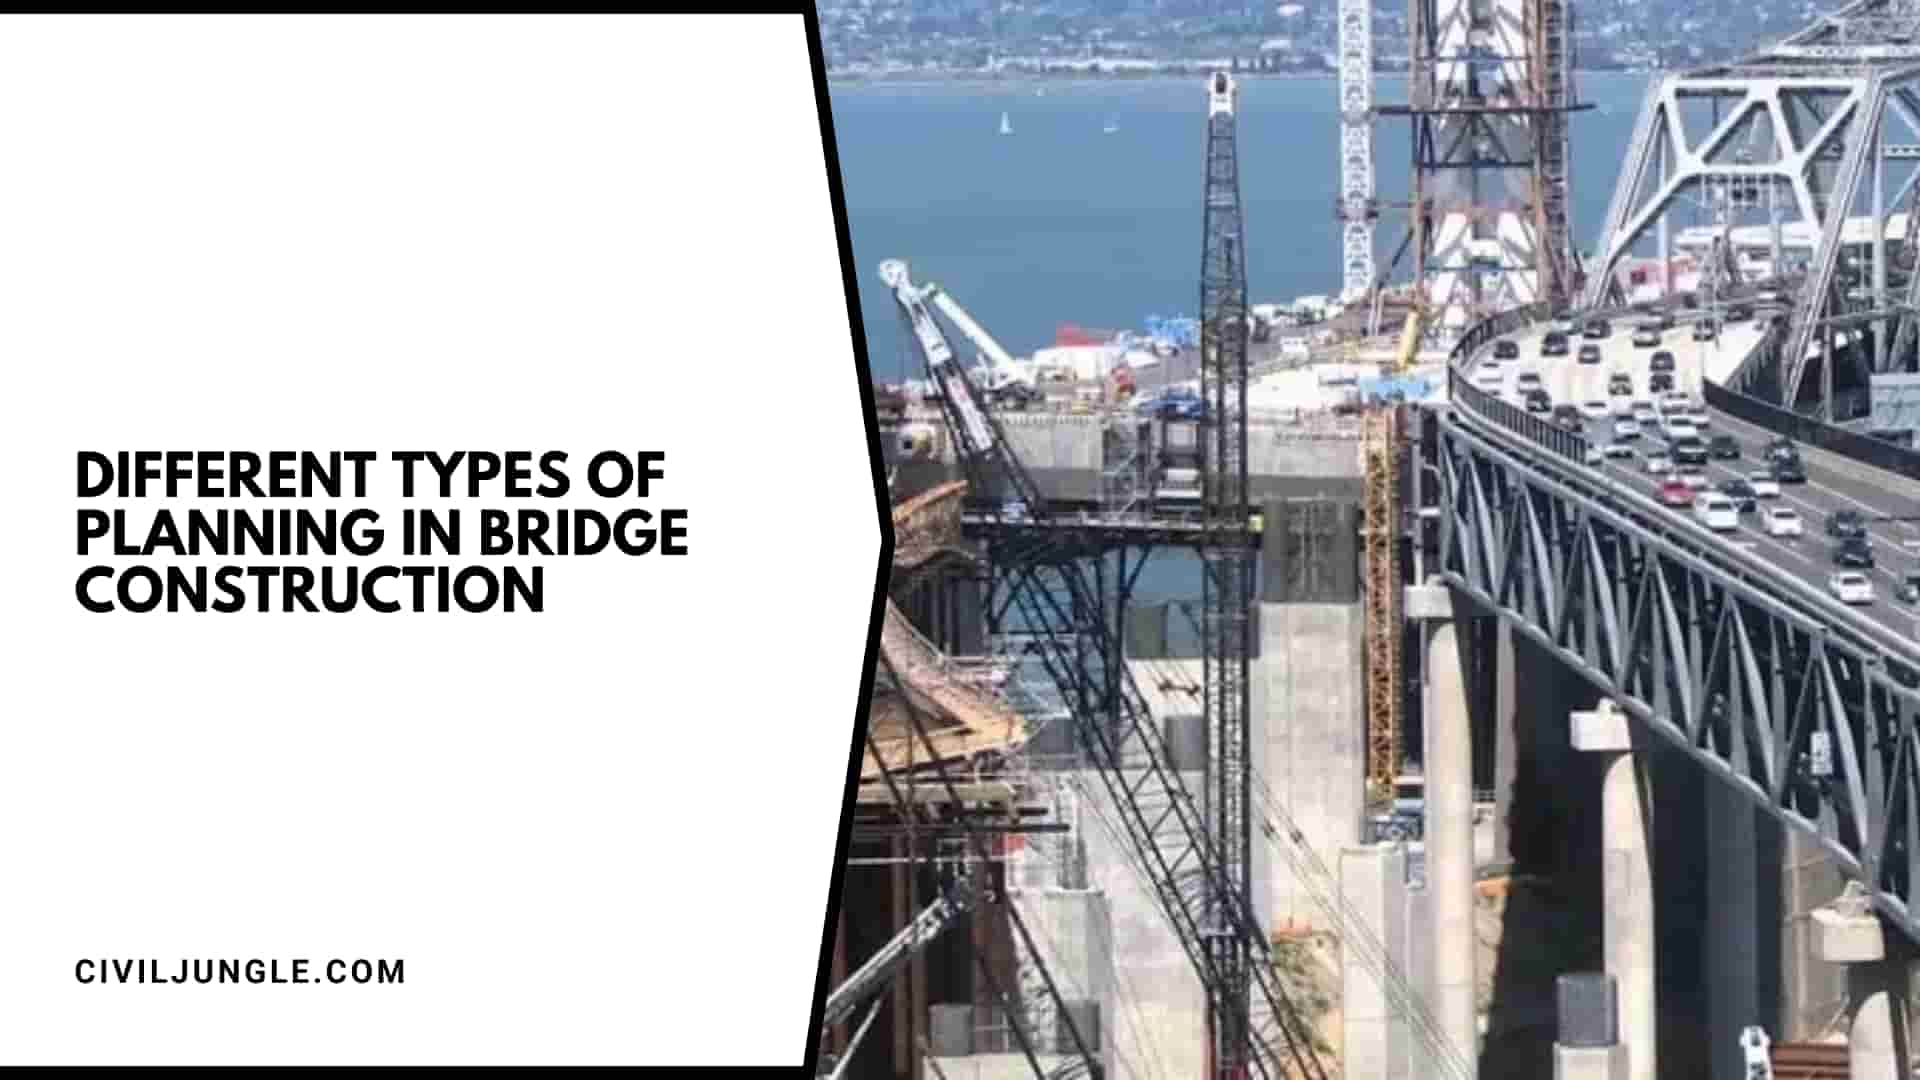 Different Types of Planning in Bridge Construction